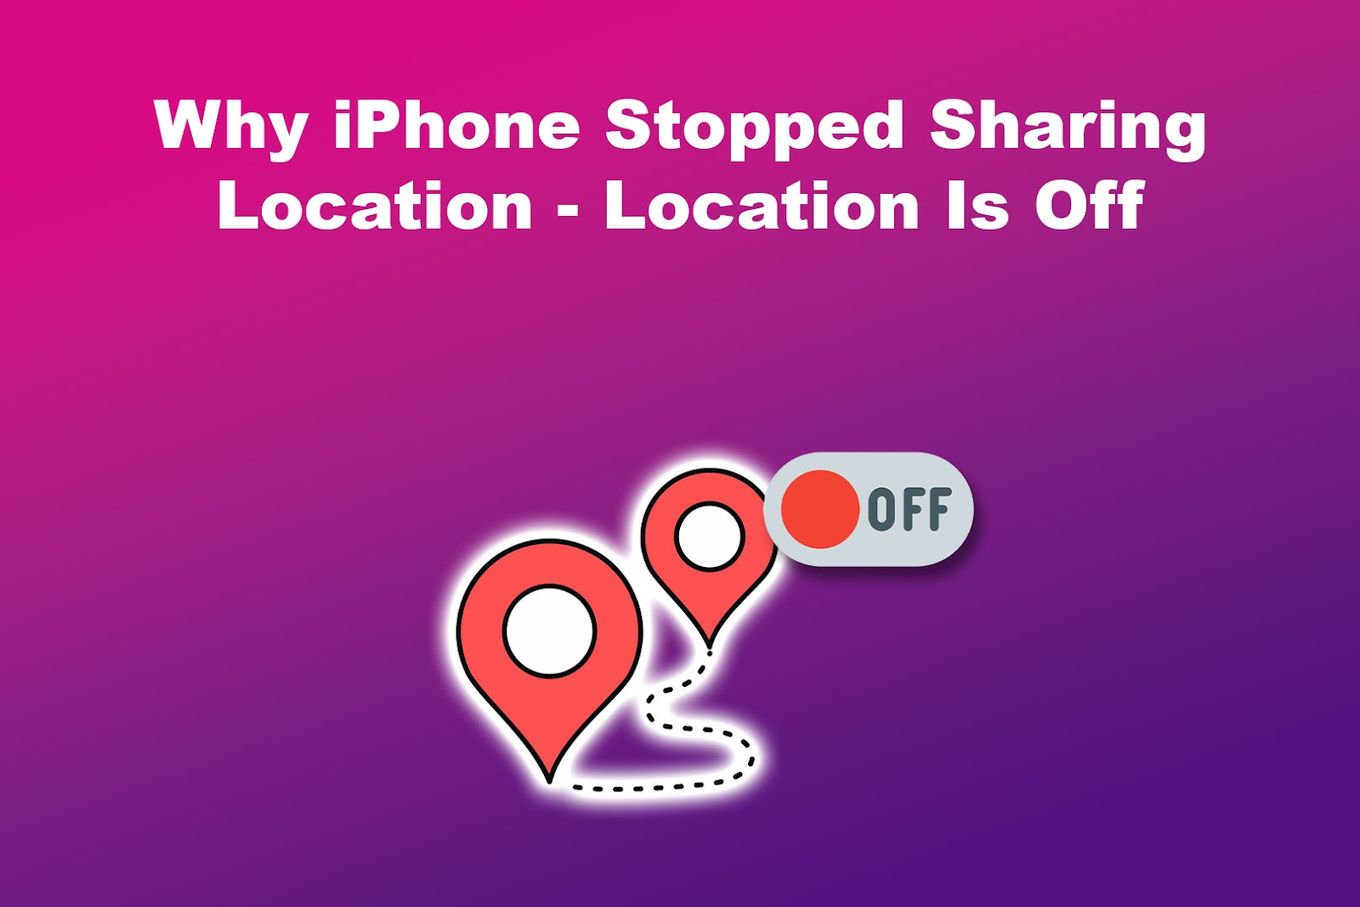 Why iPhone Stopped Sharing Location - Location Is Off